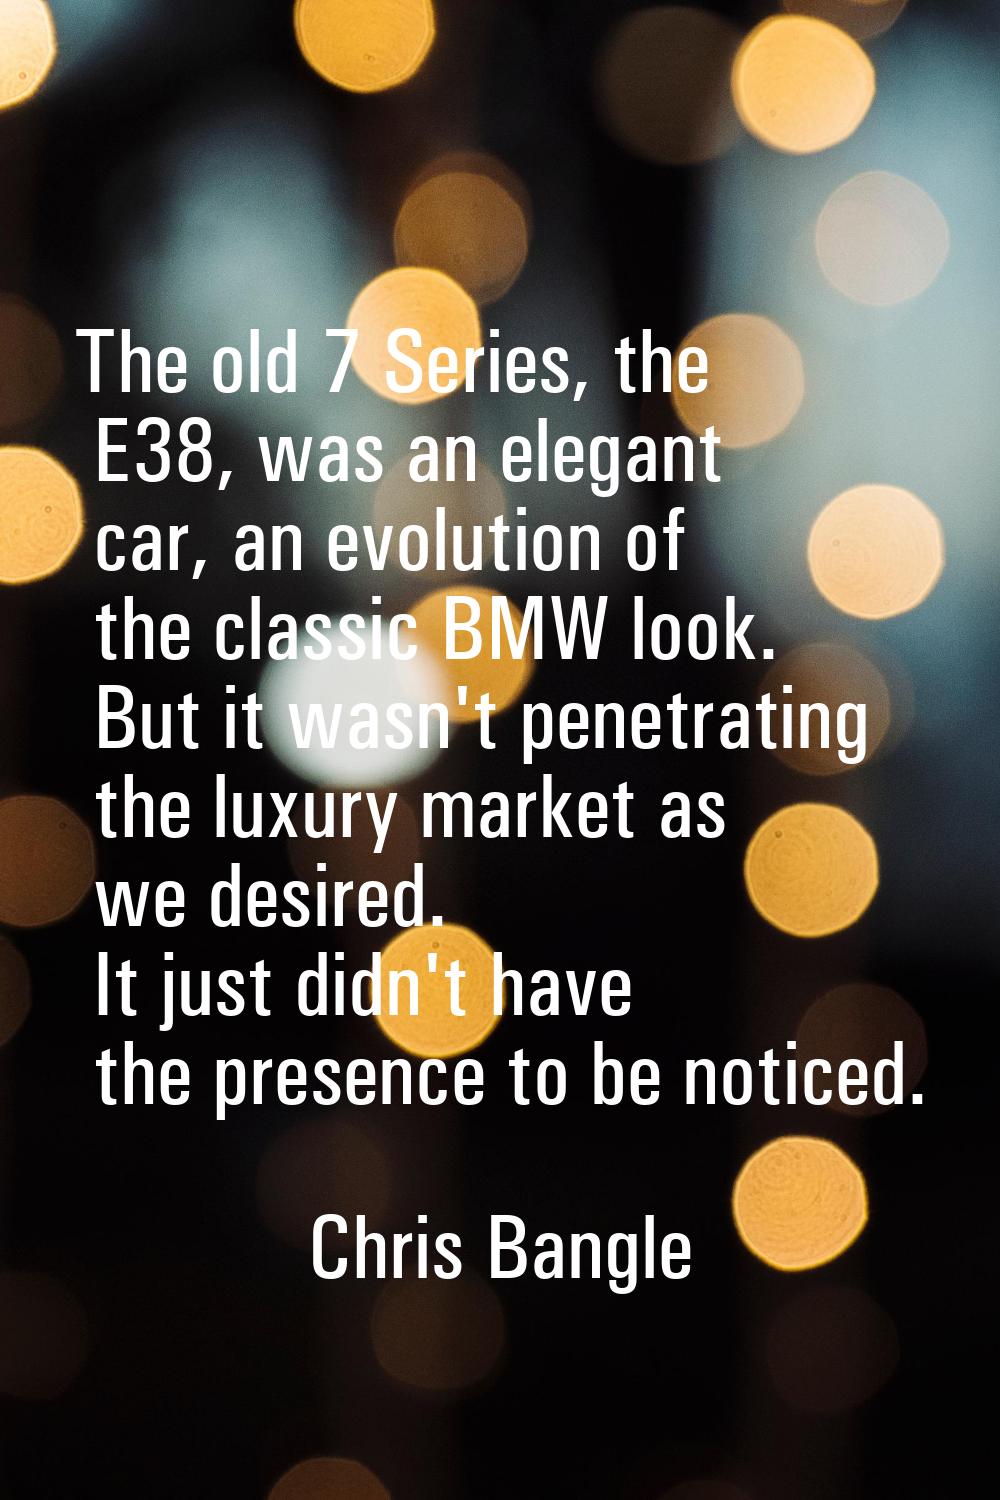 The old 7 Series, the E38, was an elegant car, an evolution of the classic BMW look. But it wasn't 